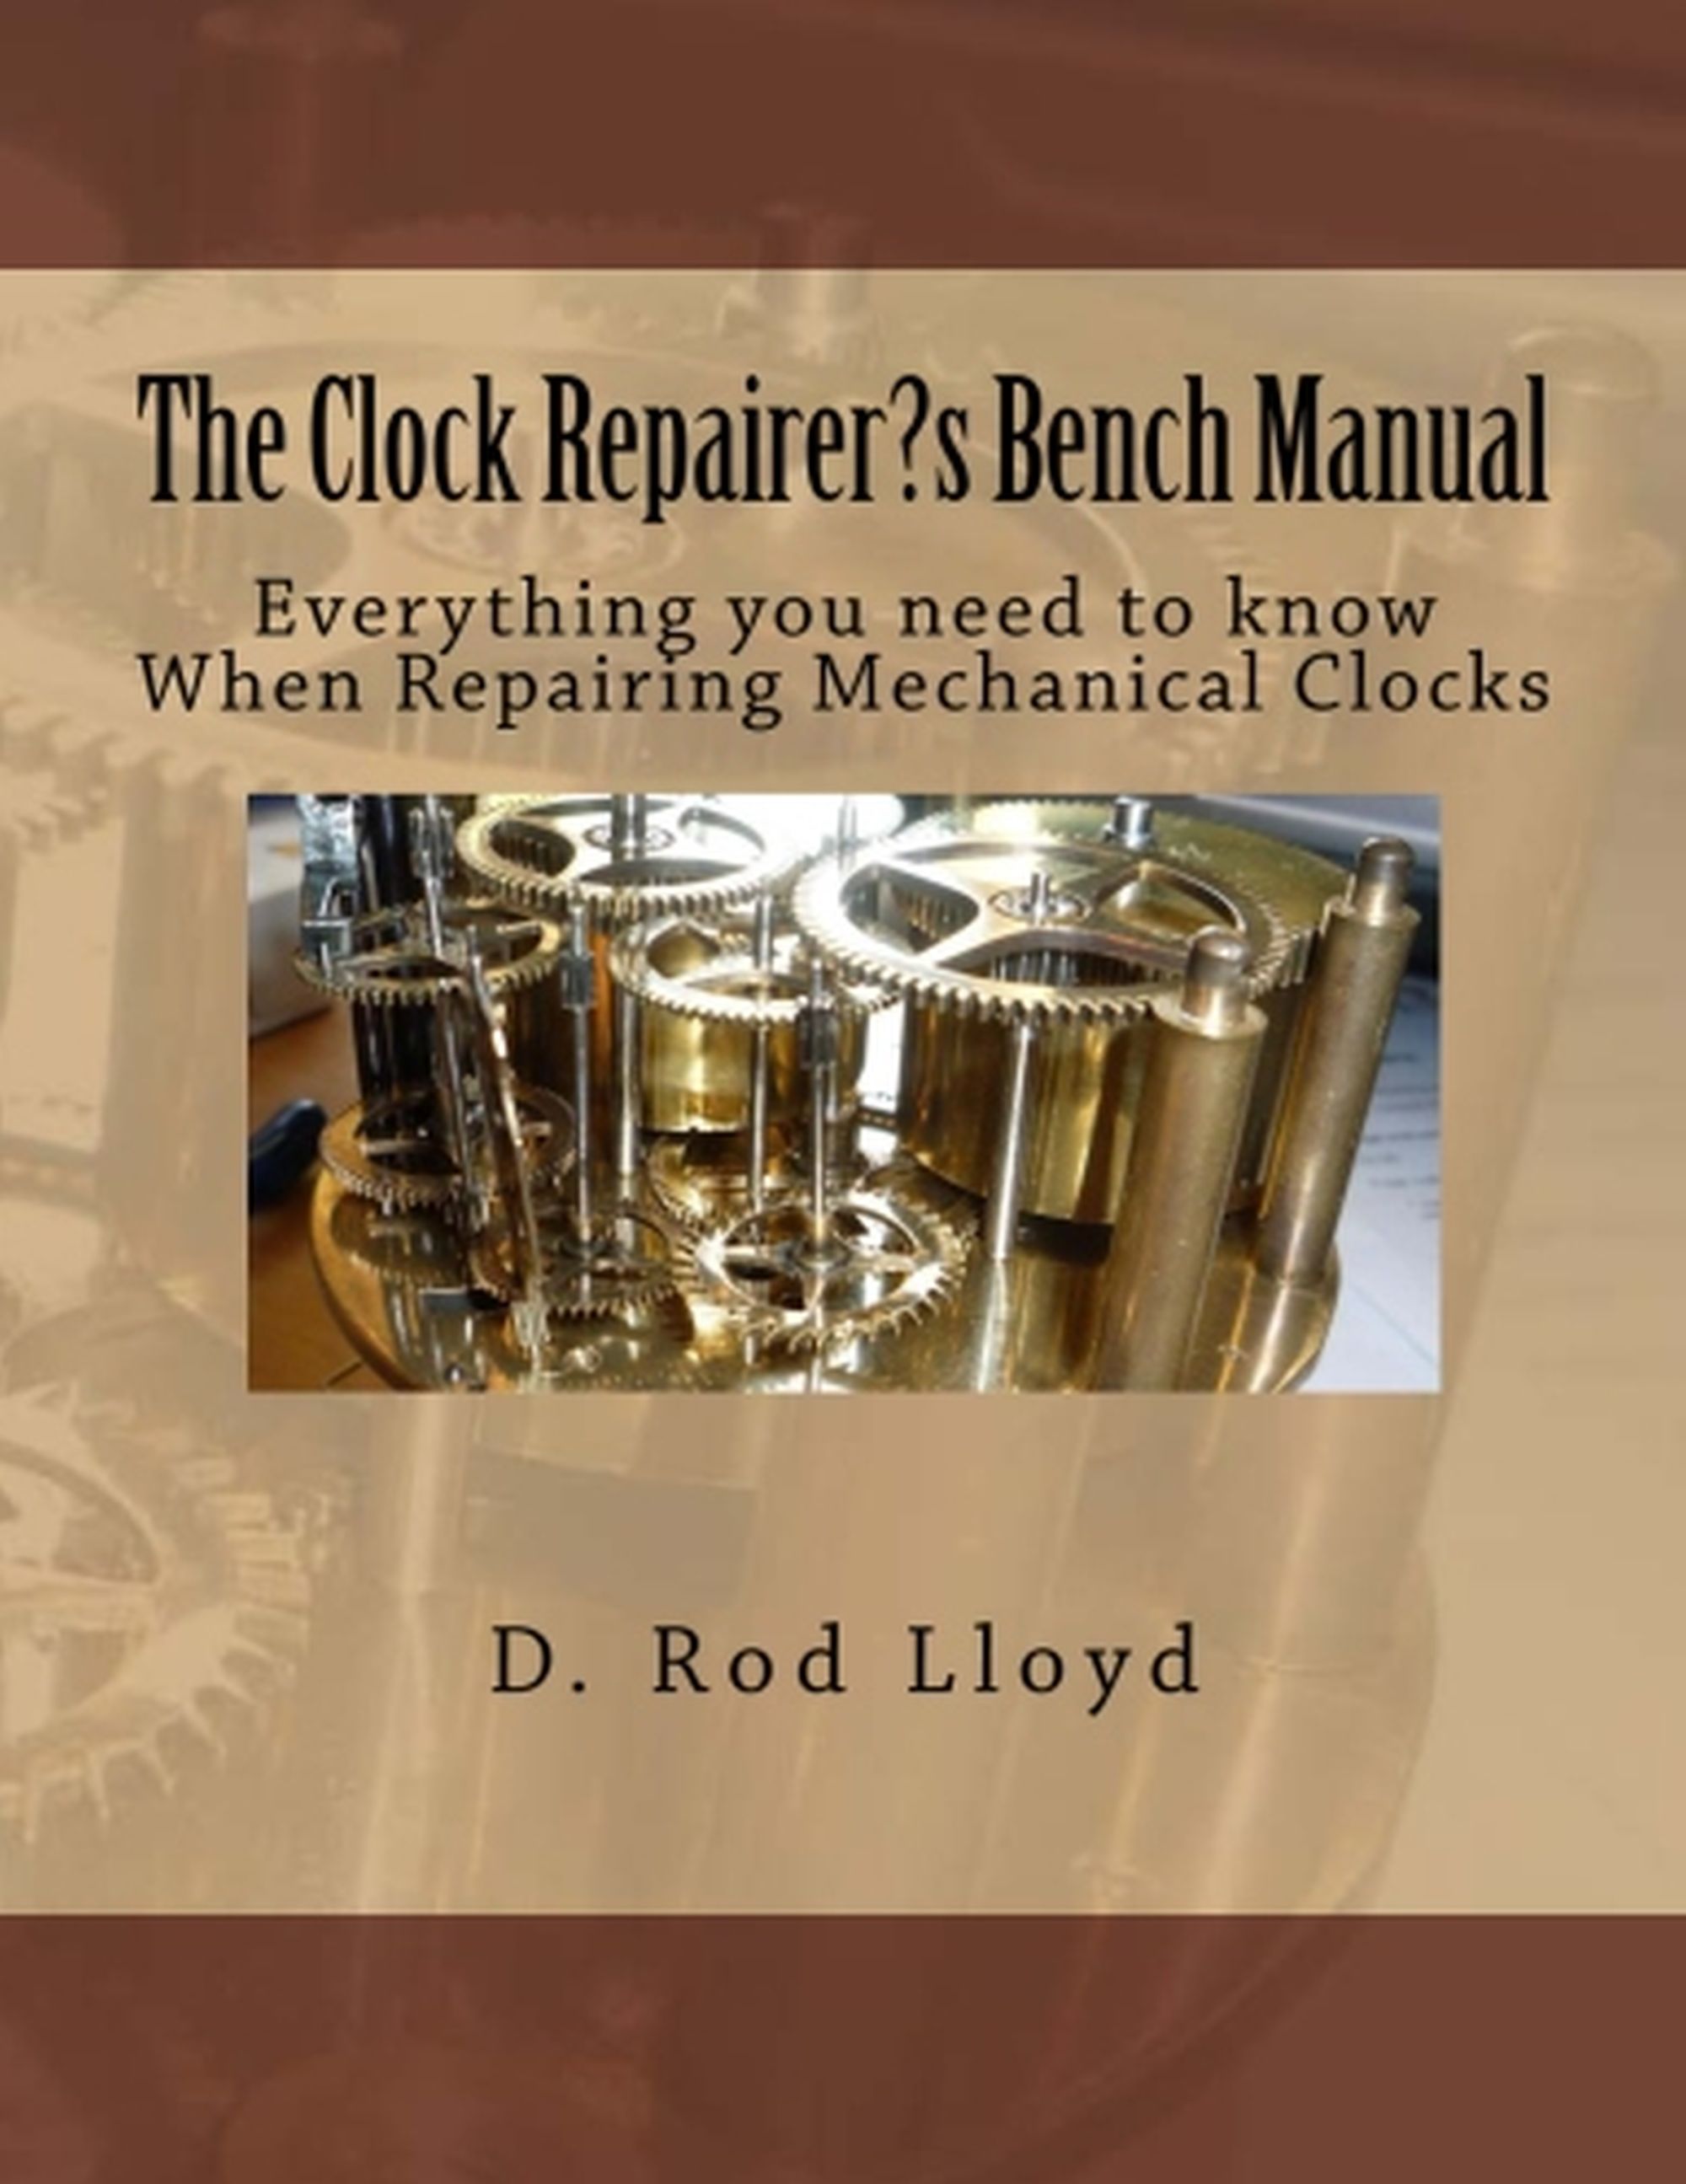 The Clock Repairers Bench Manual